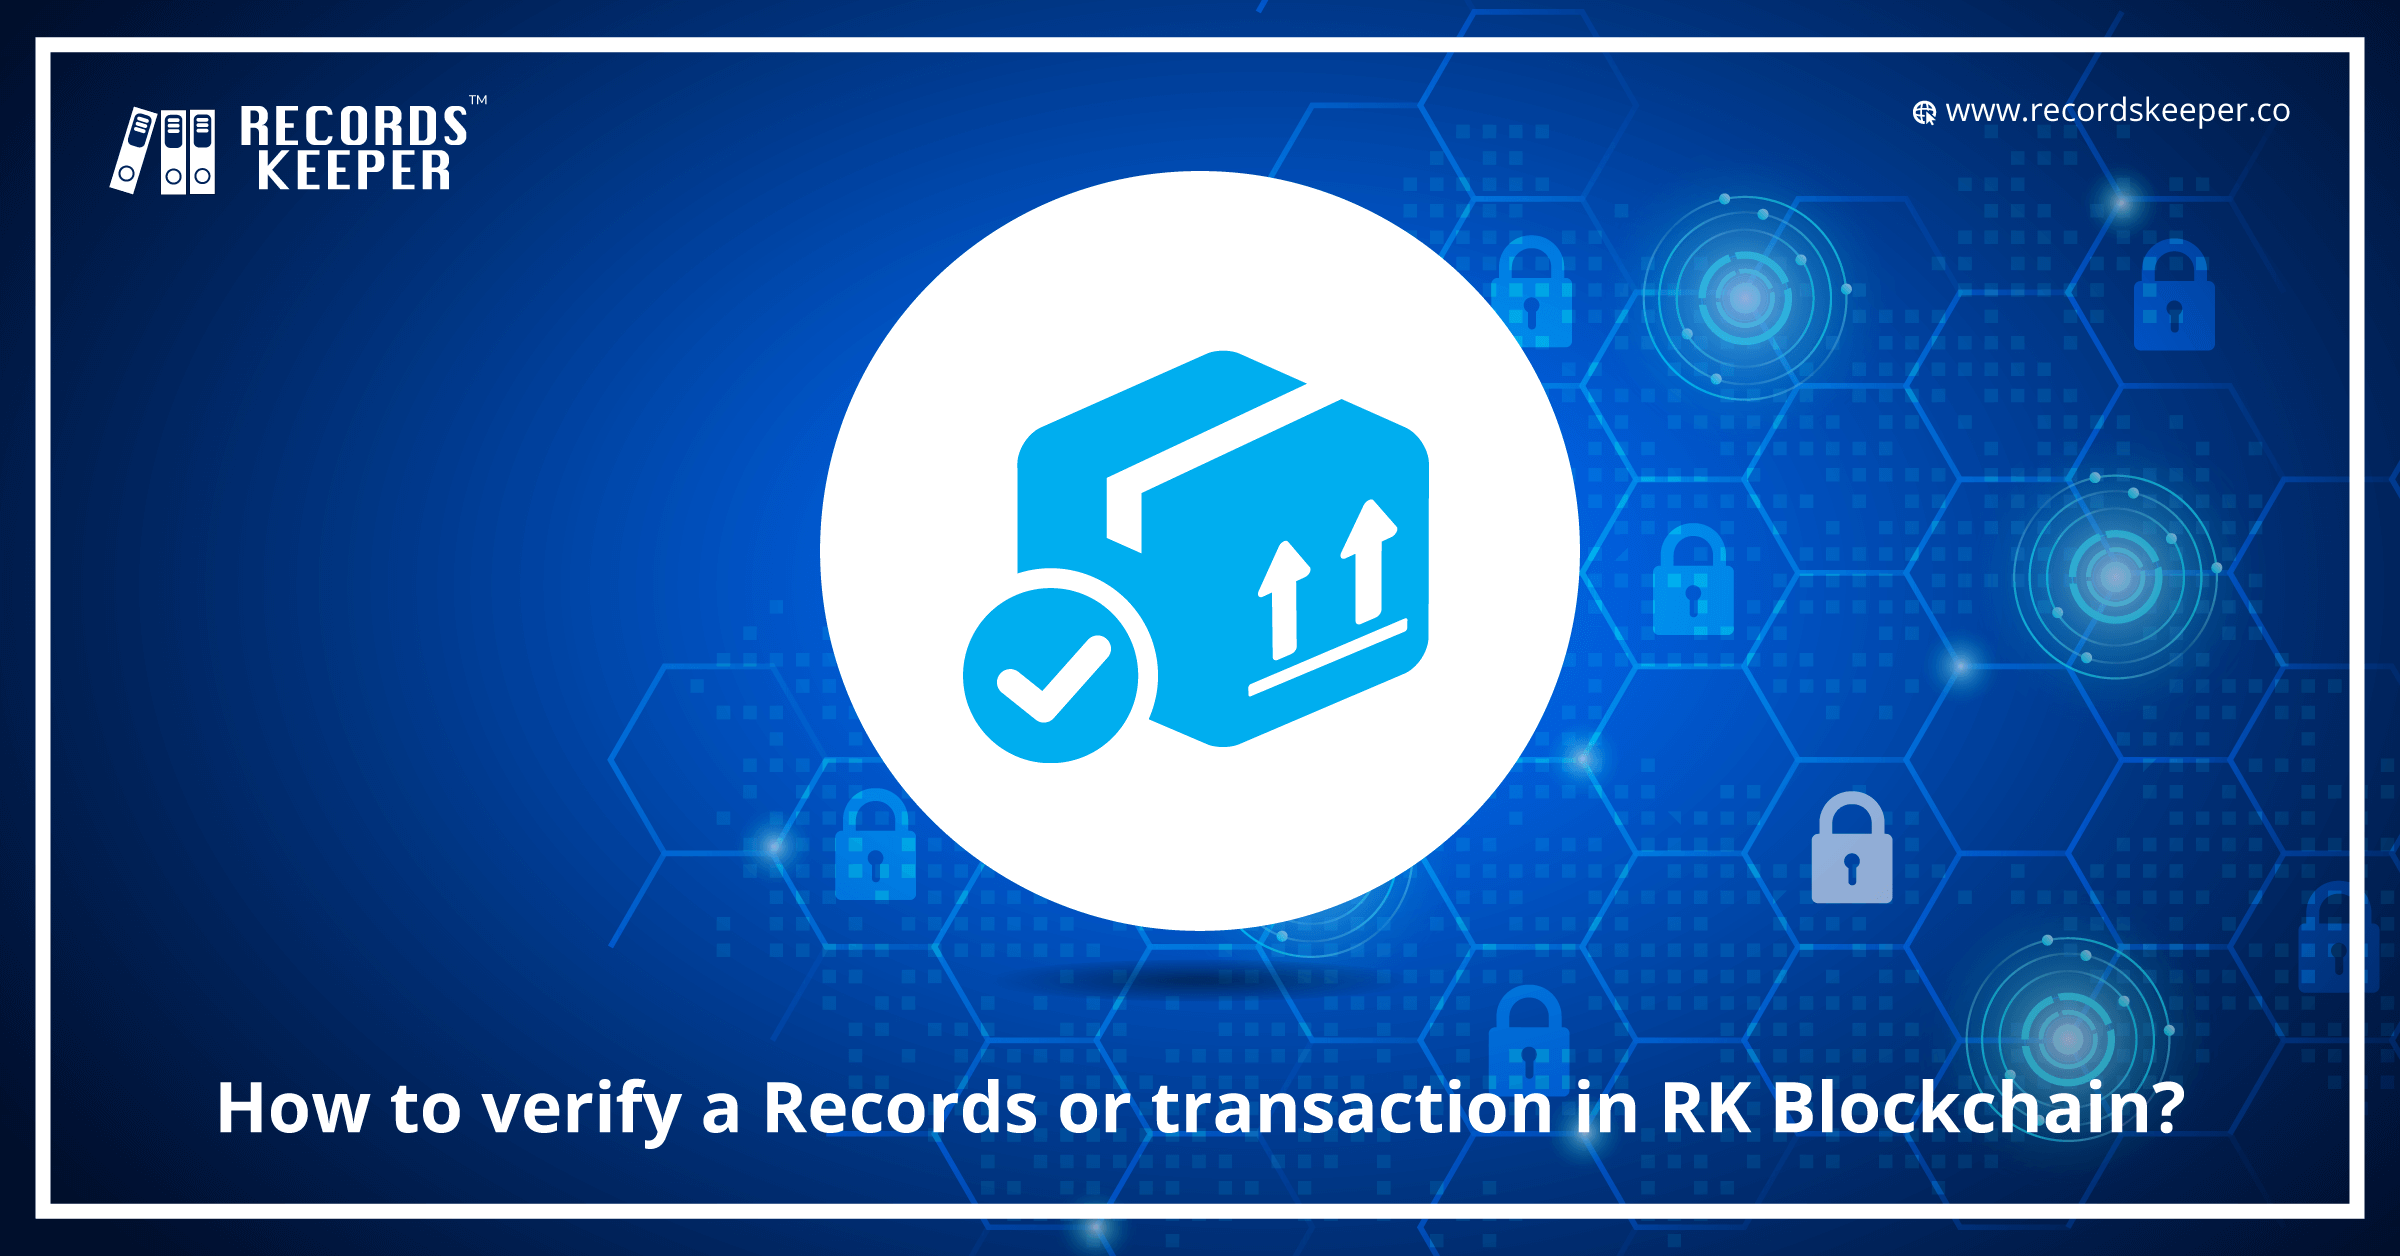 How to verify Records/Transactions in RecordsKeeper Blockchain?